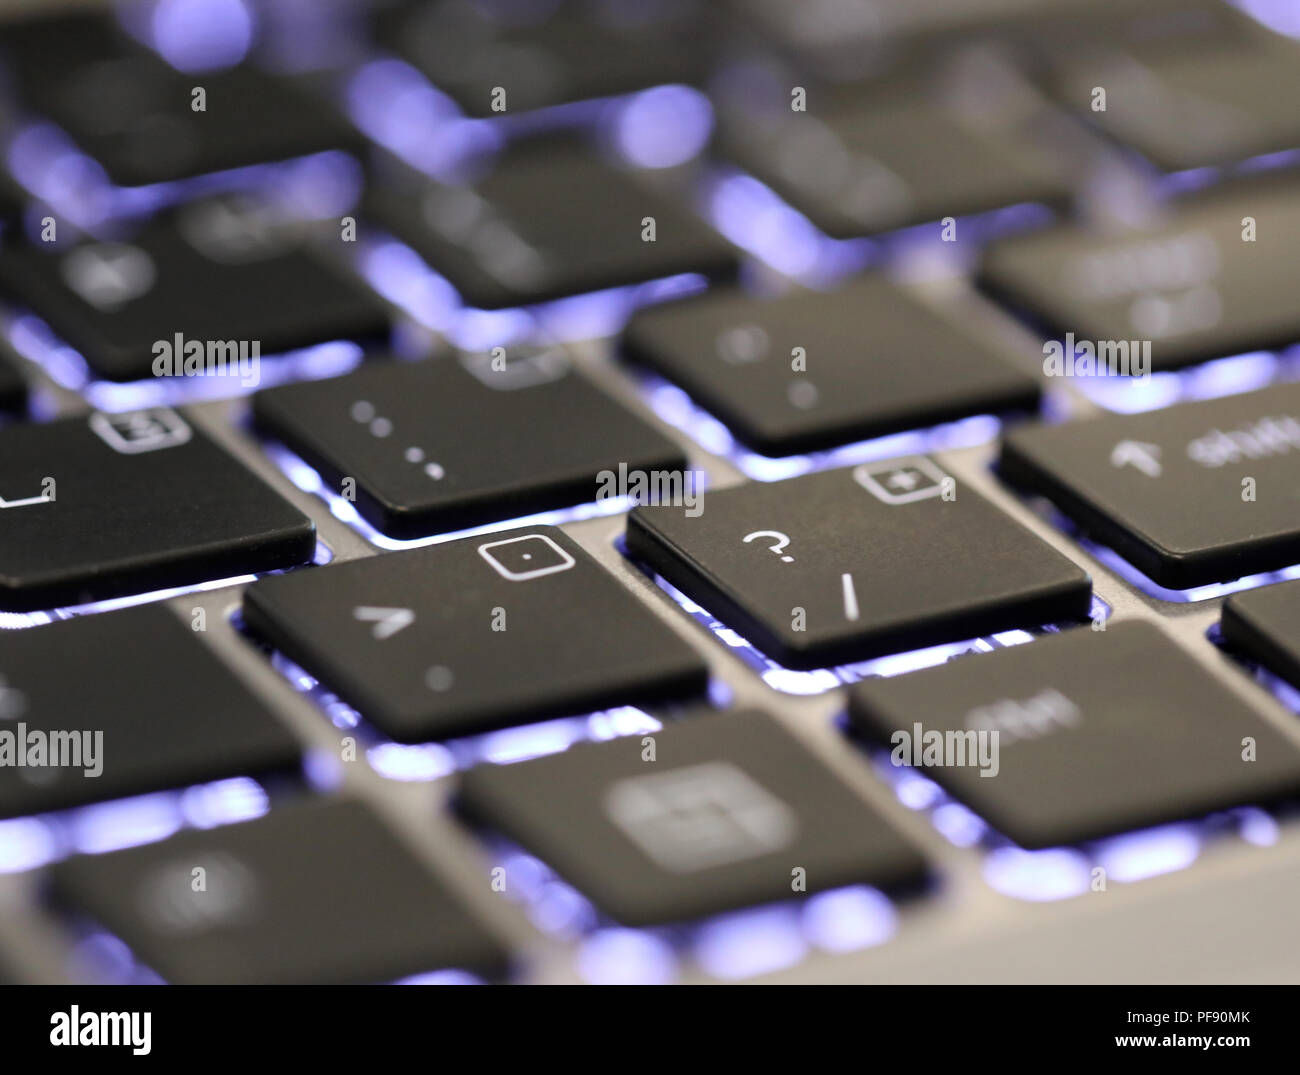 close up of the question mark symbol special character on an illuminated keyboard on a laptop or computer. Stock Photo